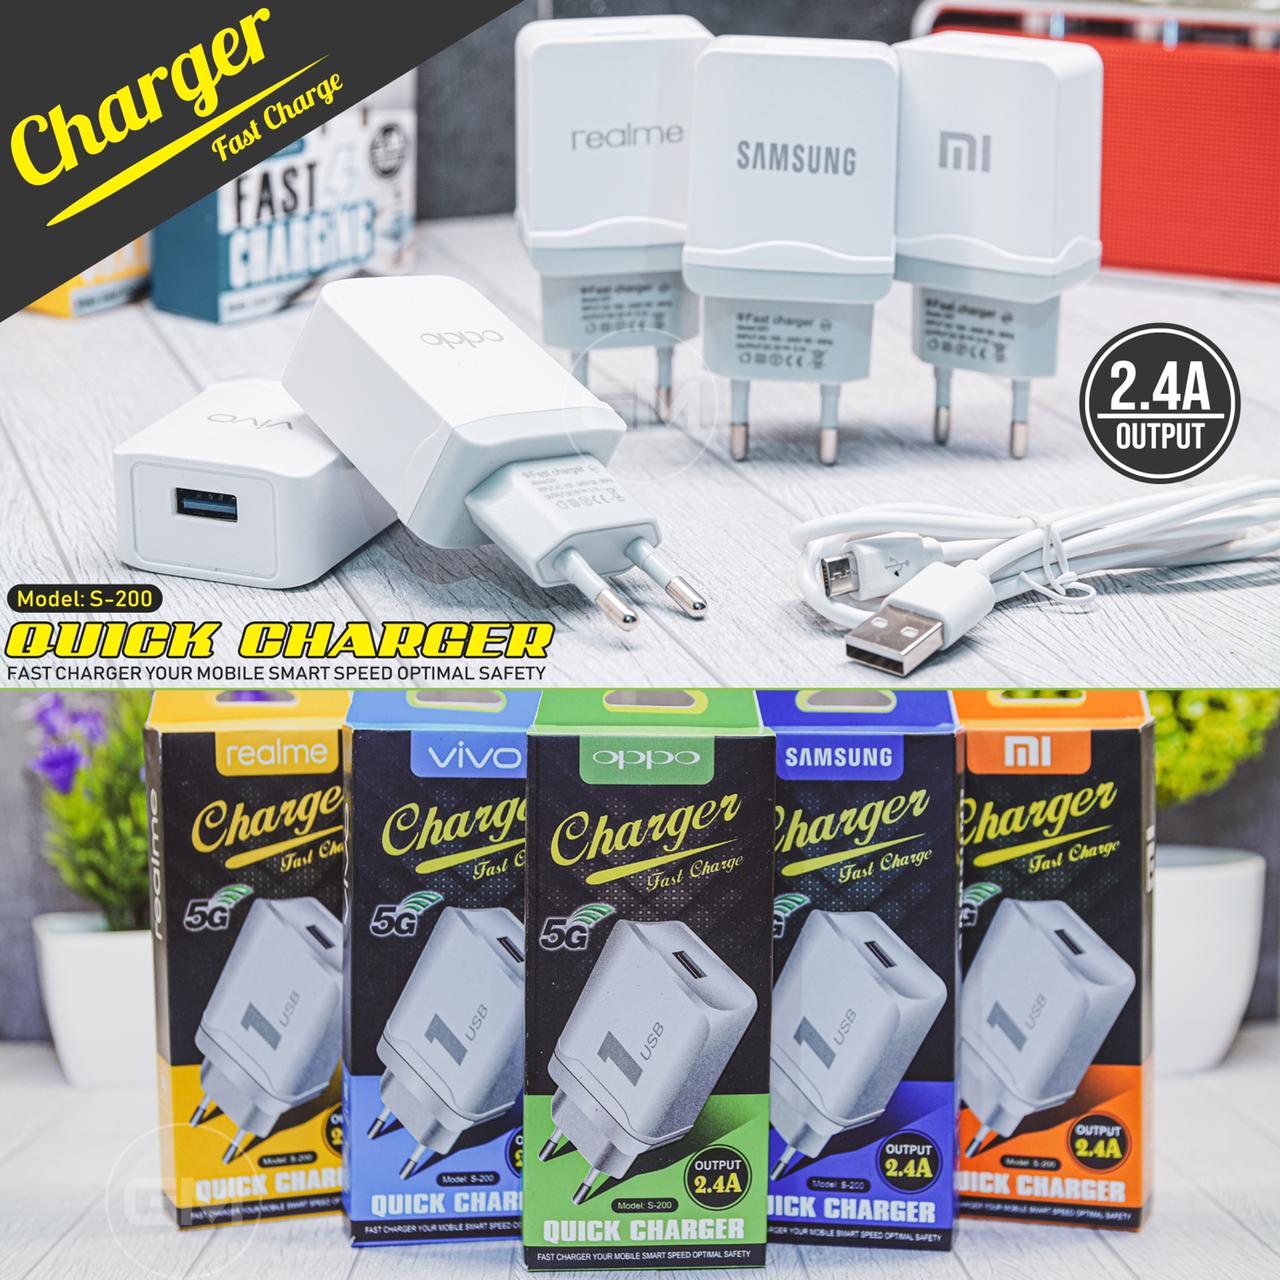 Travel Charger brand S-200 2.4A